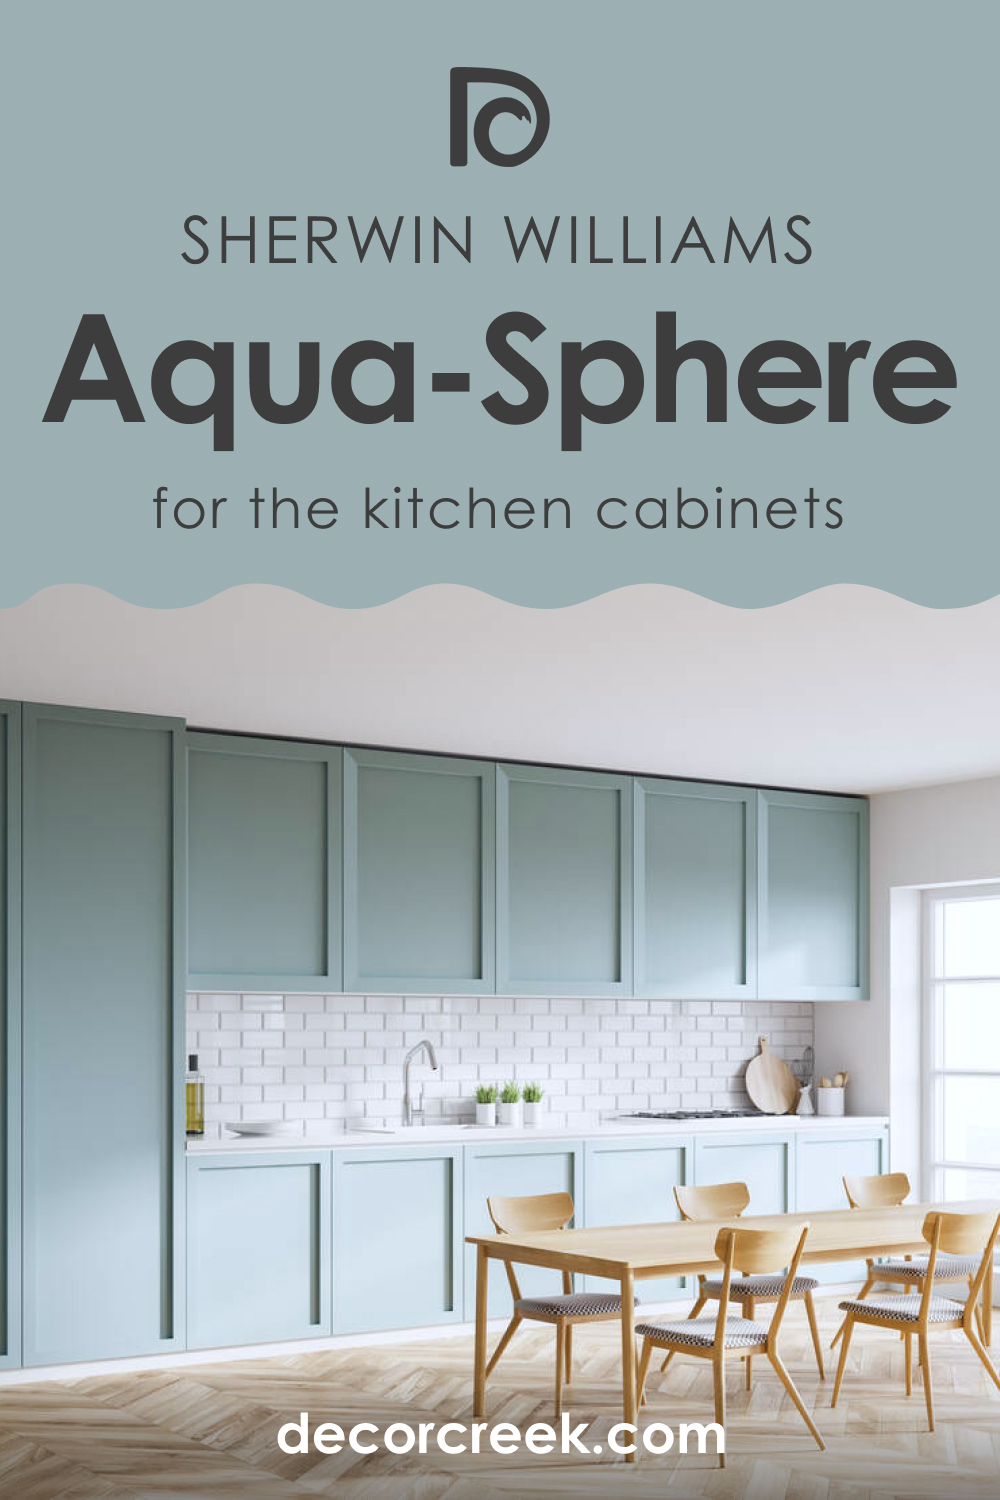 How to Use SW 7613 Aqua-Sphere for Kitchen Cabinets?